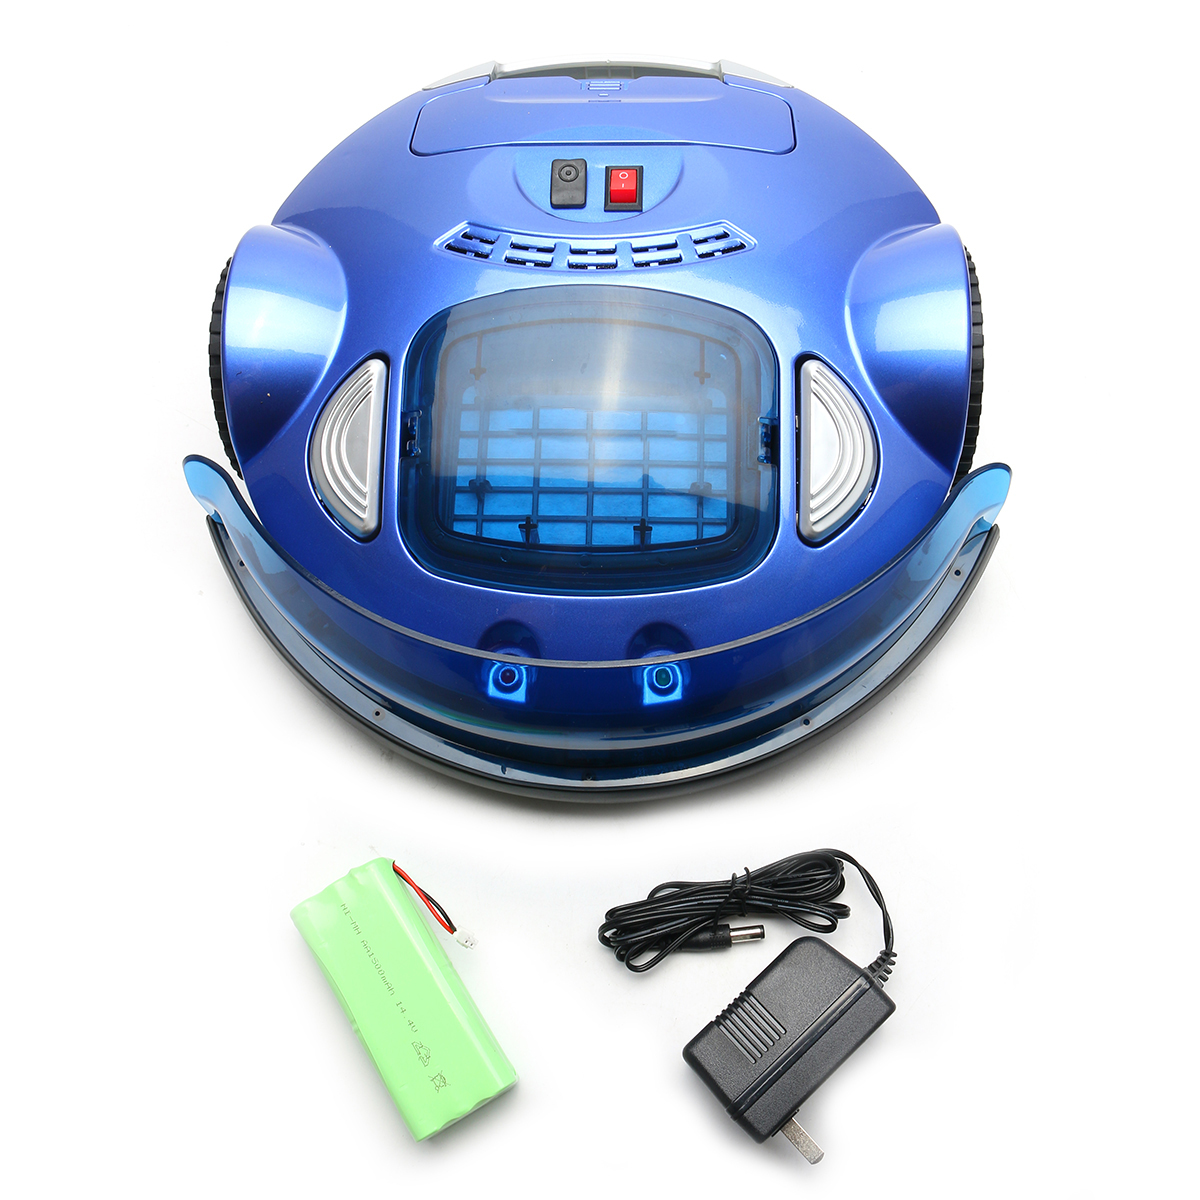 

Blue Smart Automatic Vacuum Cleaner Robot Wireless Remote Control Floor Dust Cleaner Sweeper